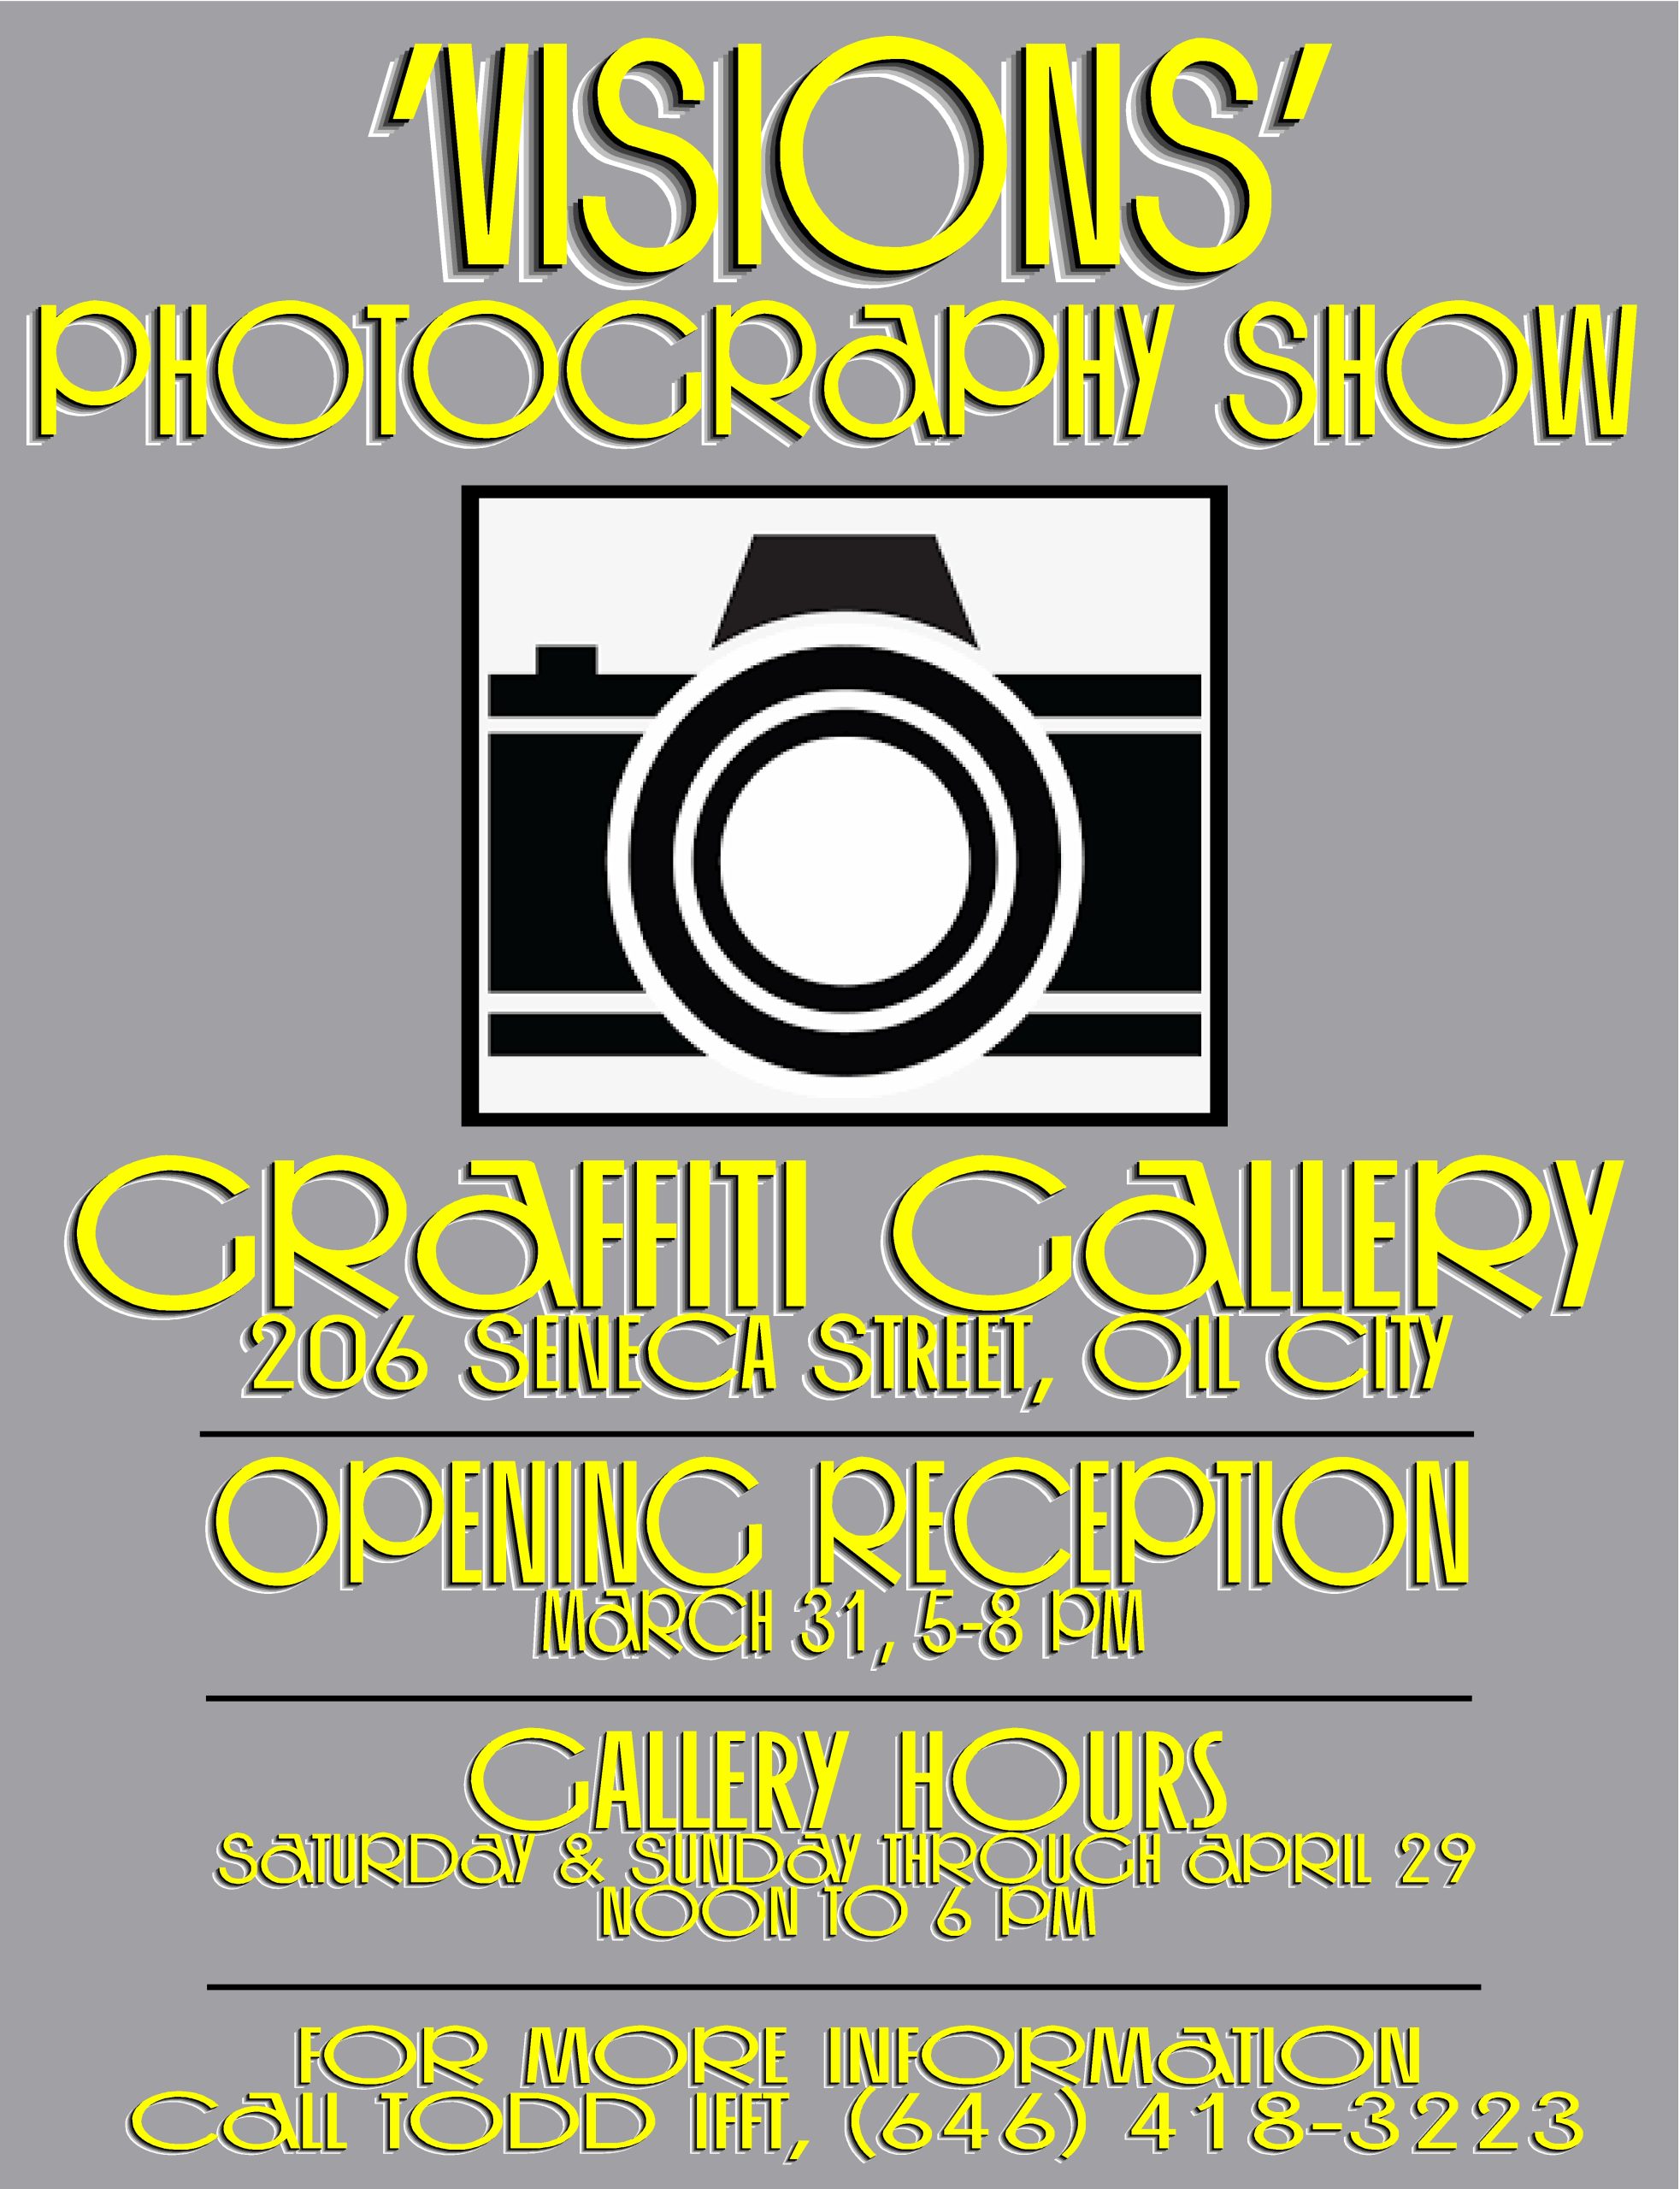 Graffiti Gallery: Visions Photography Show Opening Reception